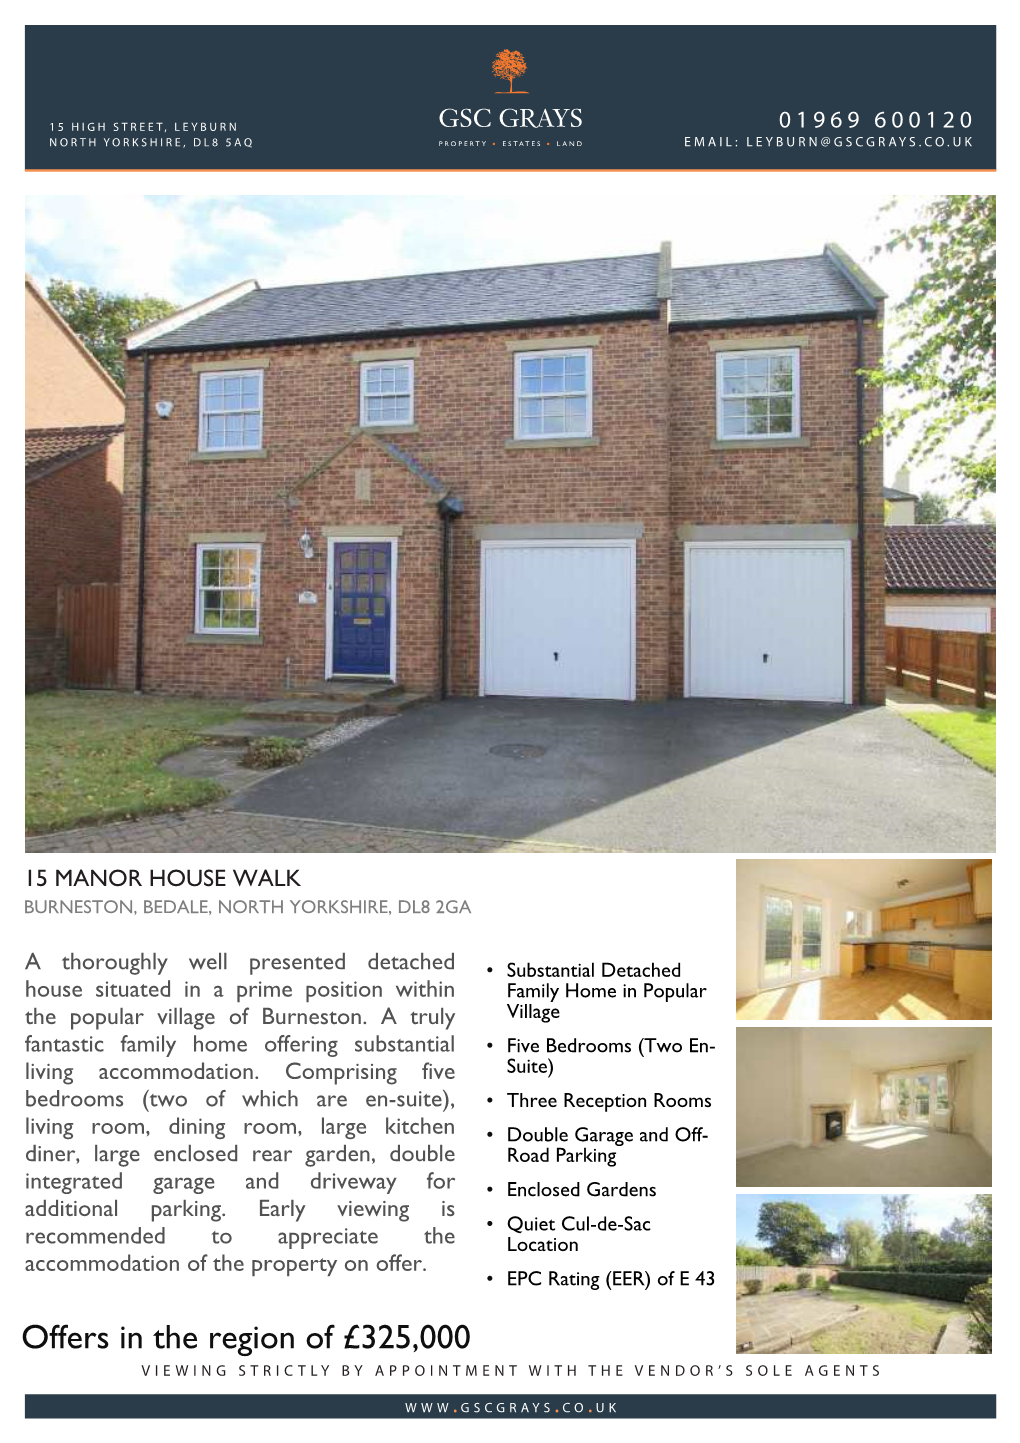 Offers in the Region of £325,000 Viewing Strictly by Appointment with the Vendor’S Sole Agents